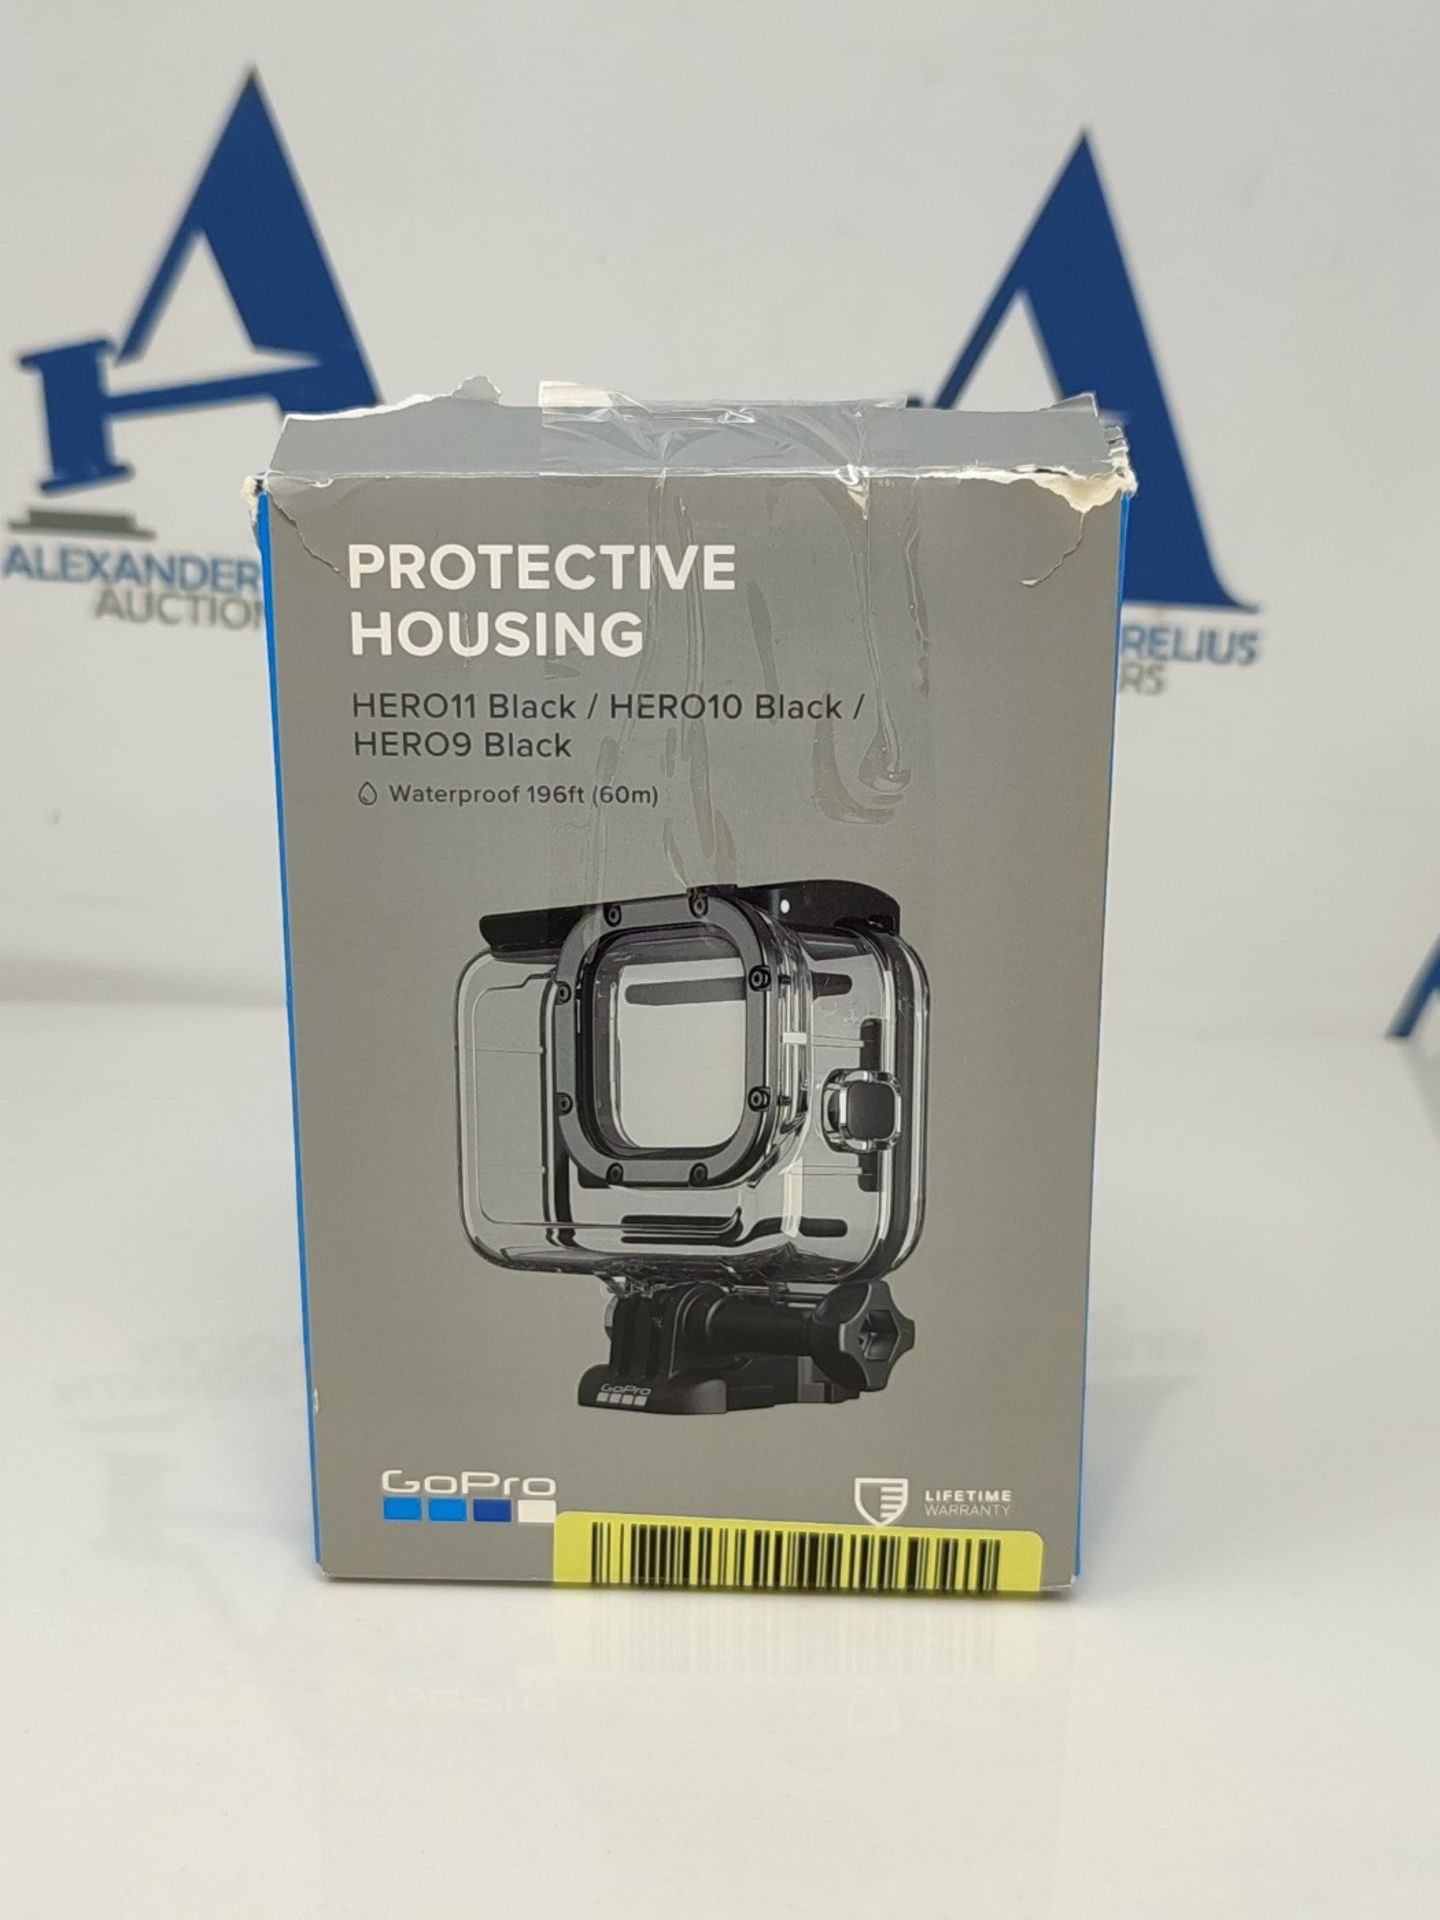 Protective case (HERO10 Black/HERO9 Black) - Official GoPro accessory - Image 2 of 3